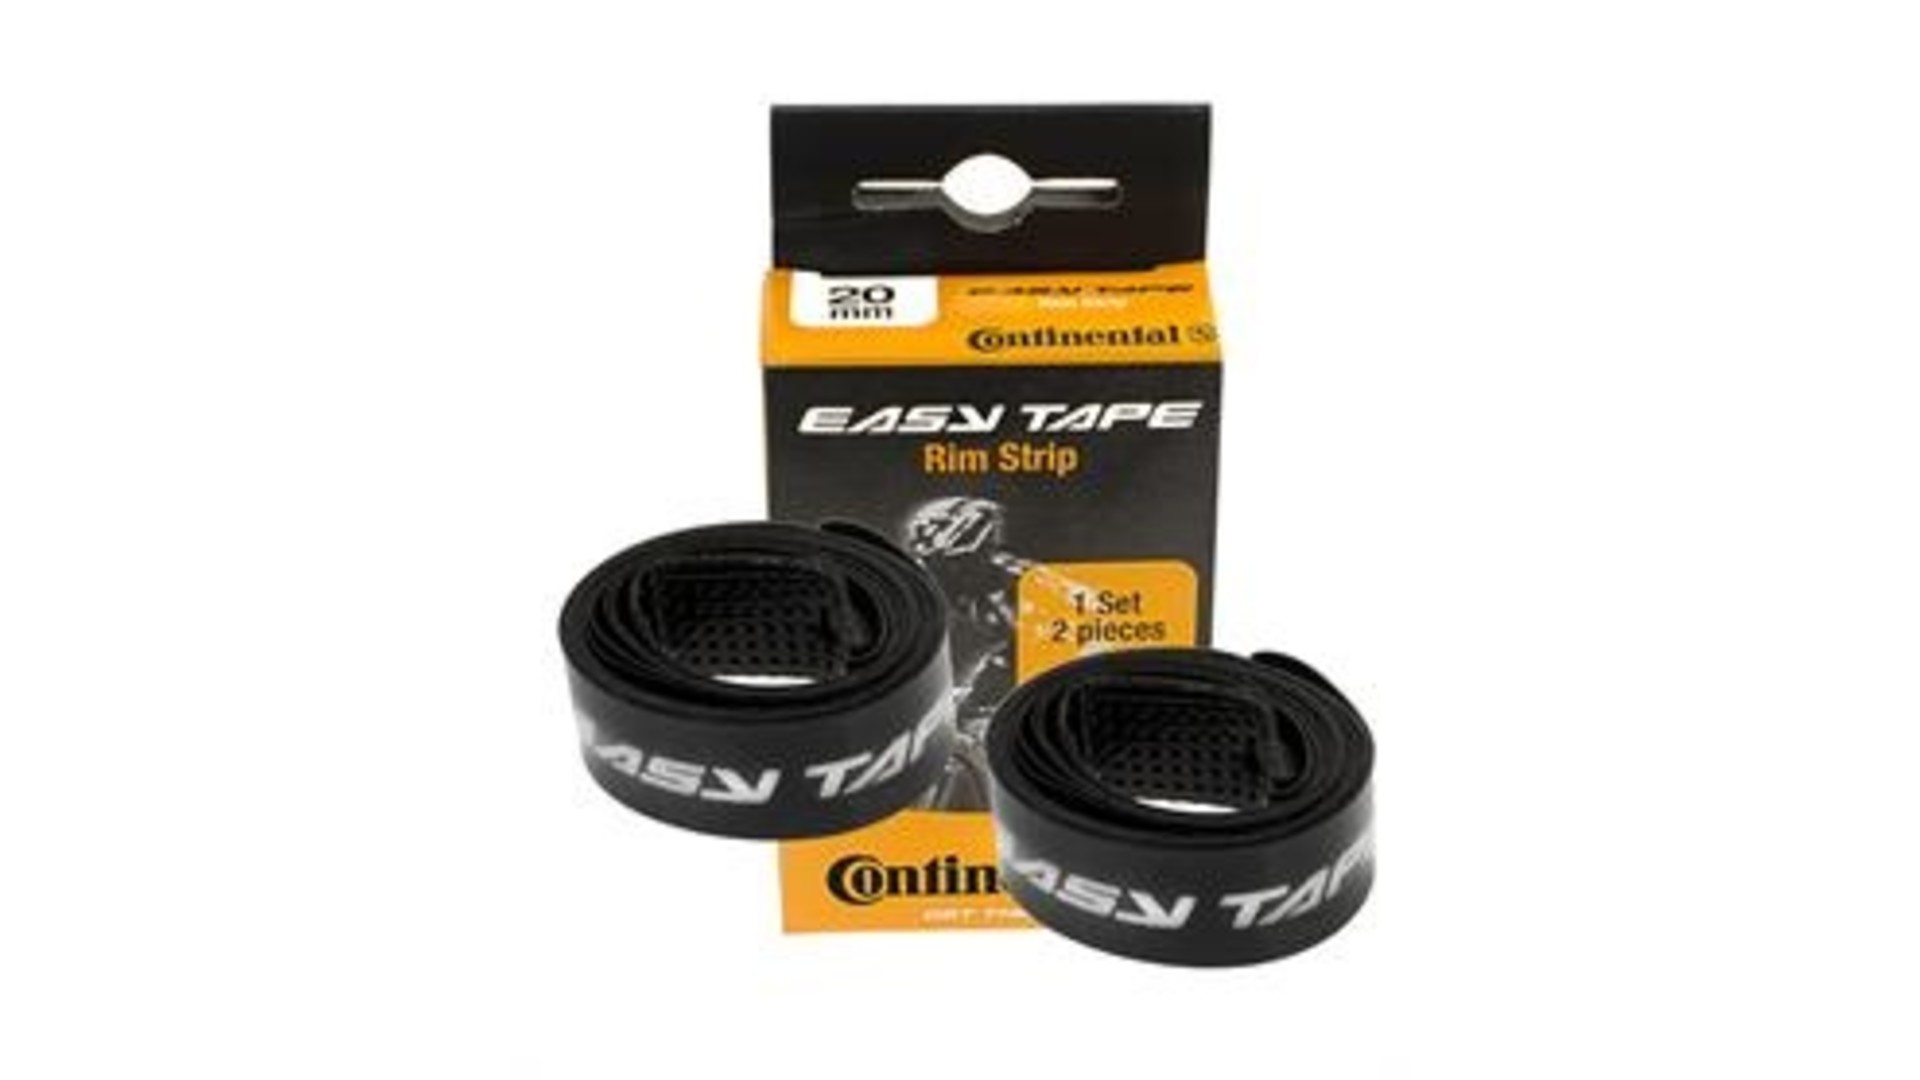 Continental Continental Easy Tape 20-559